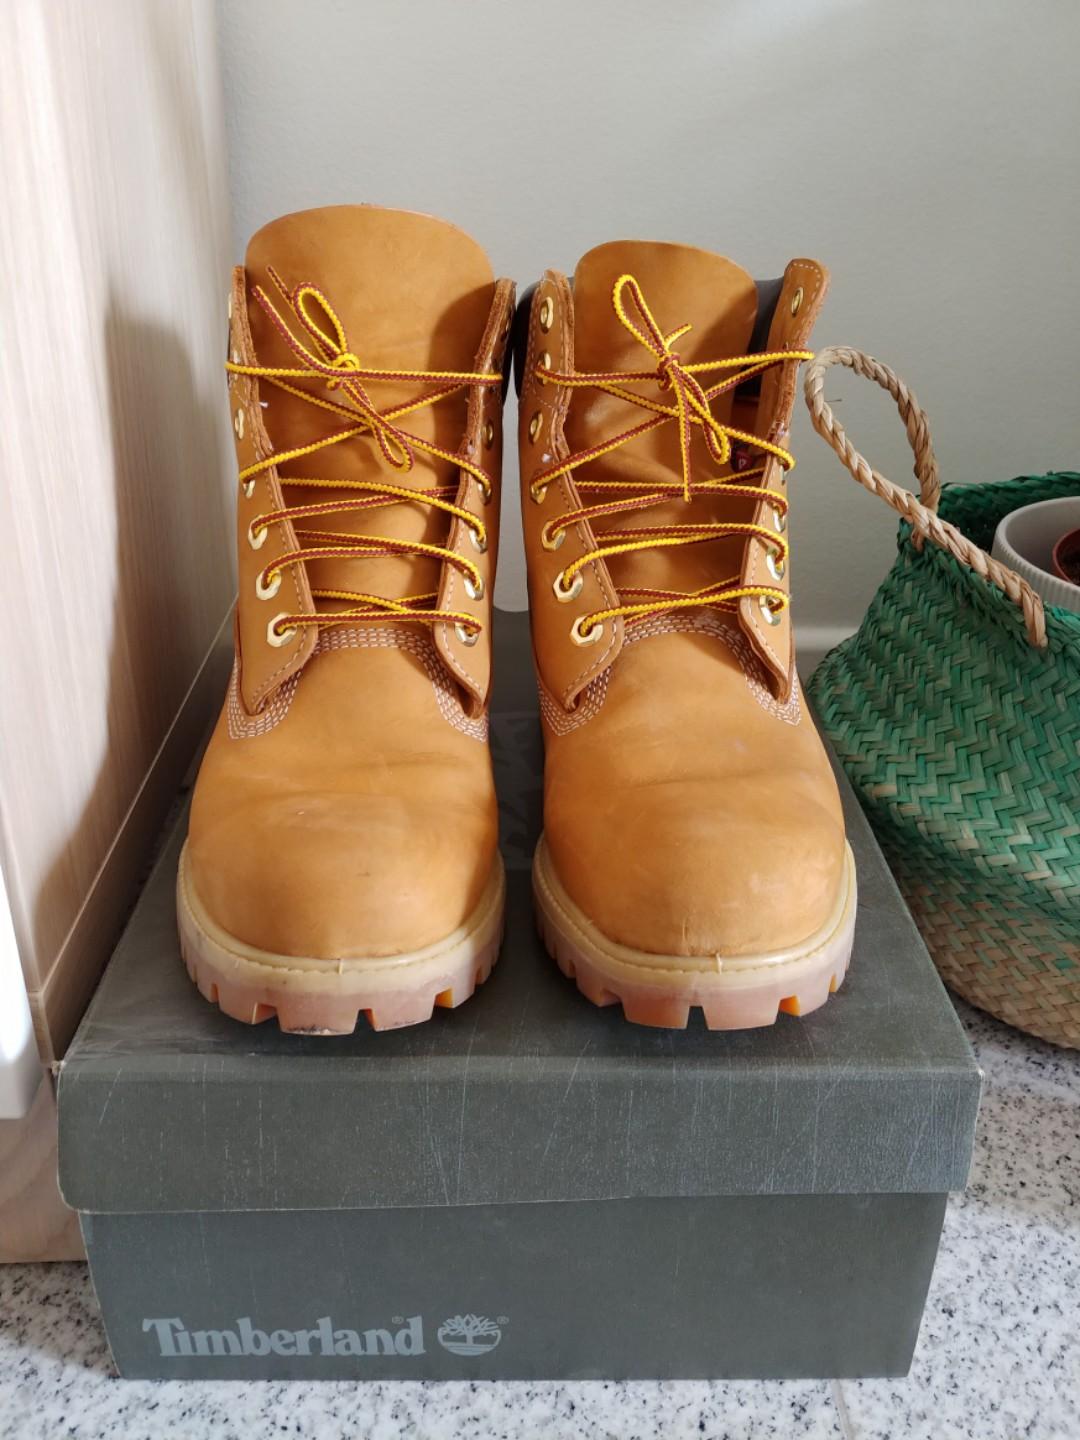 mens classic timberland boots